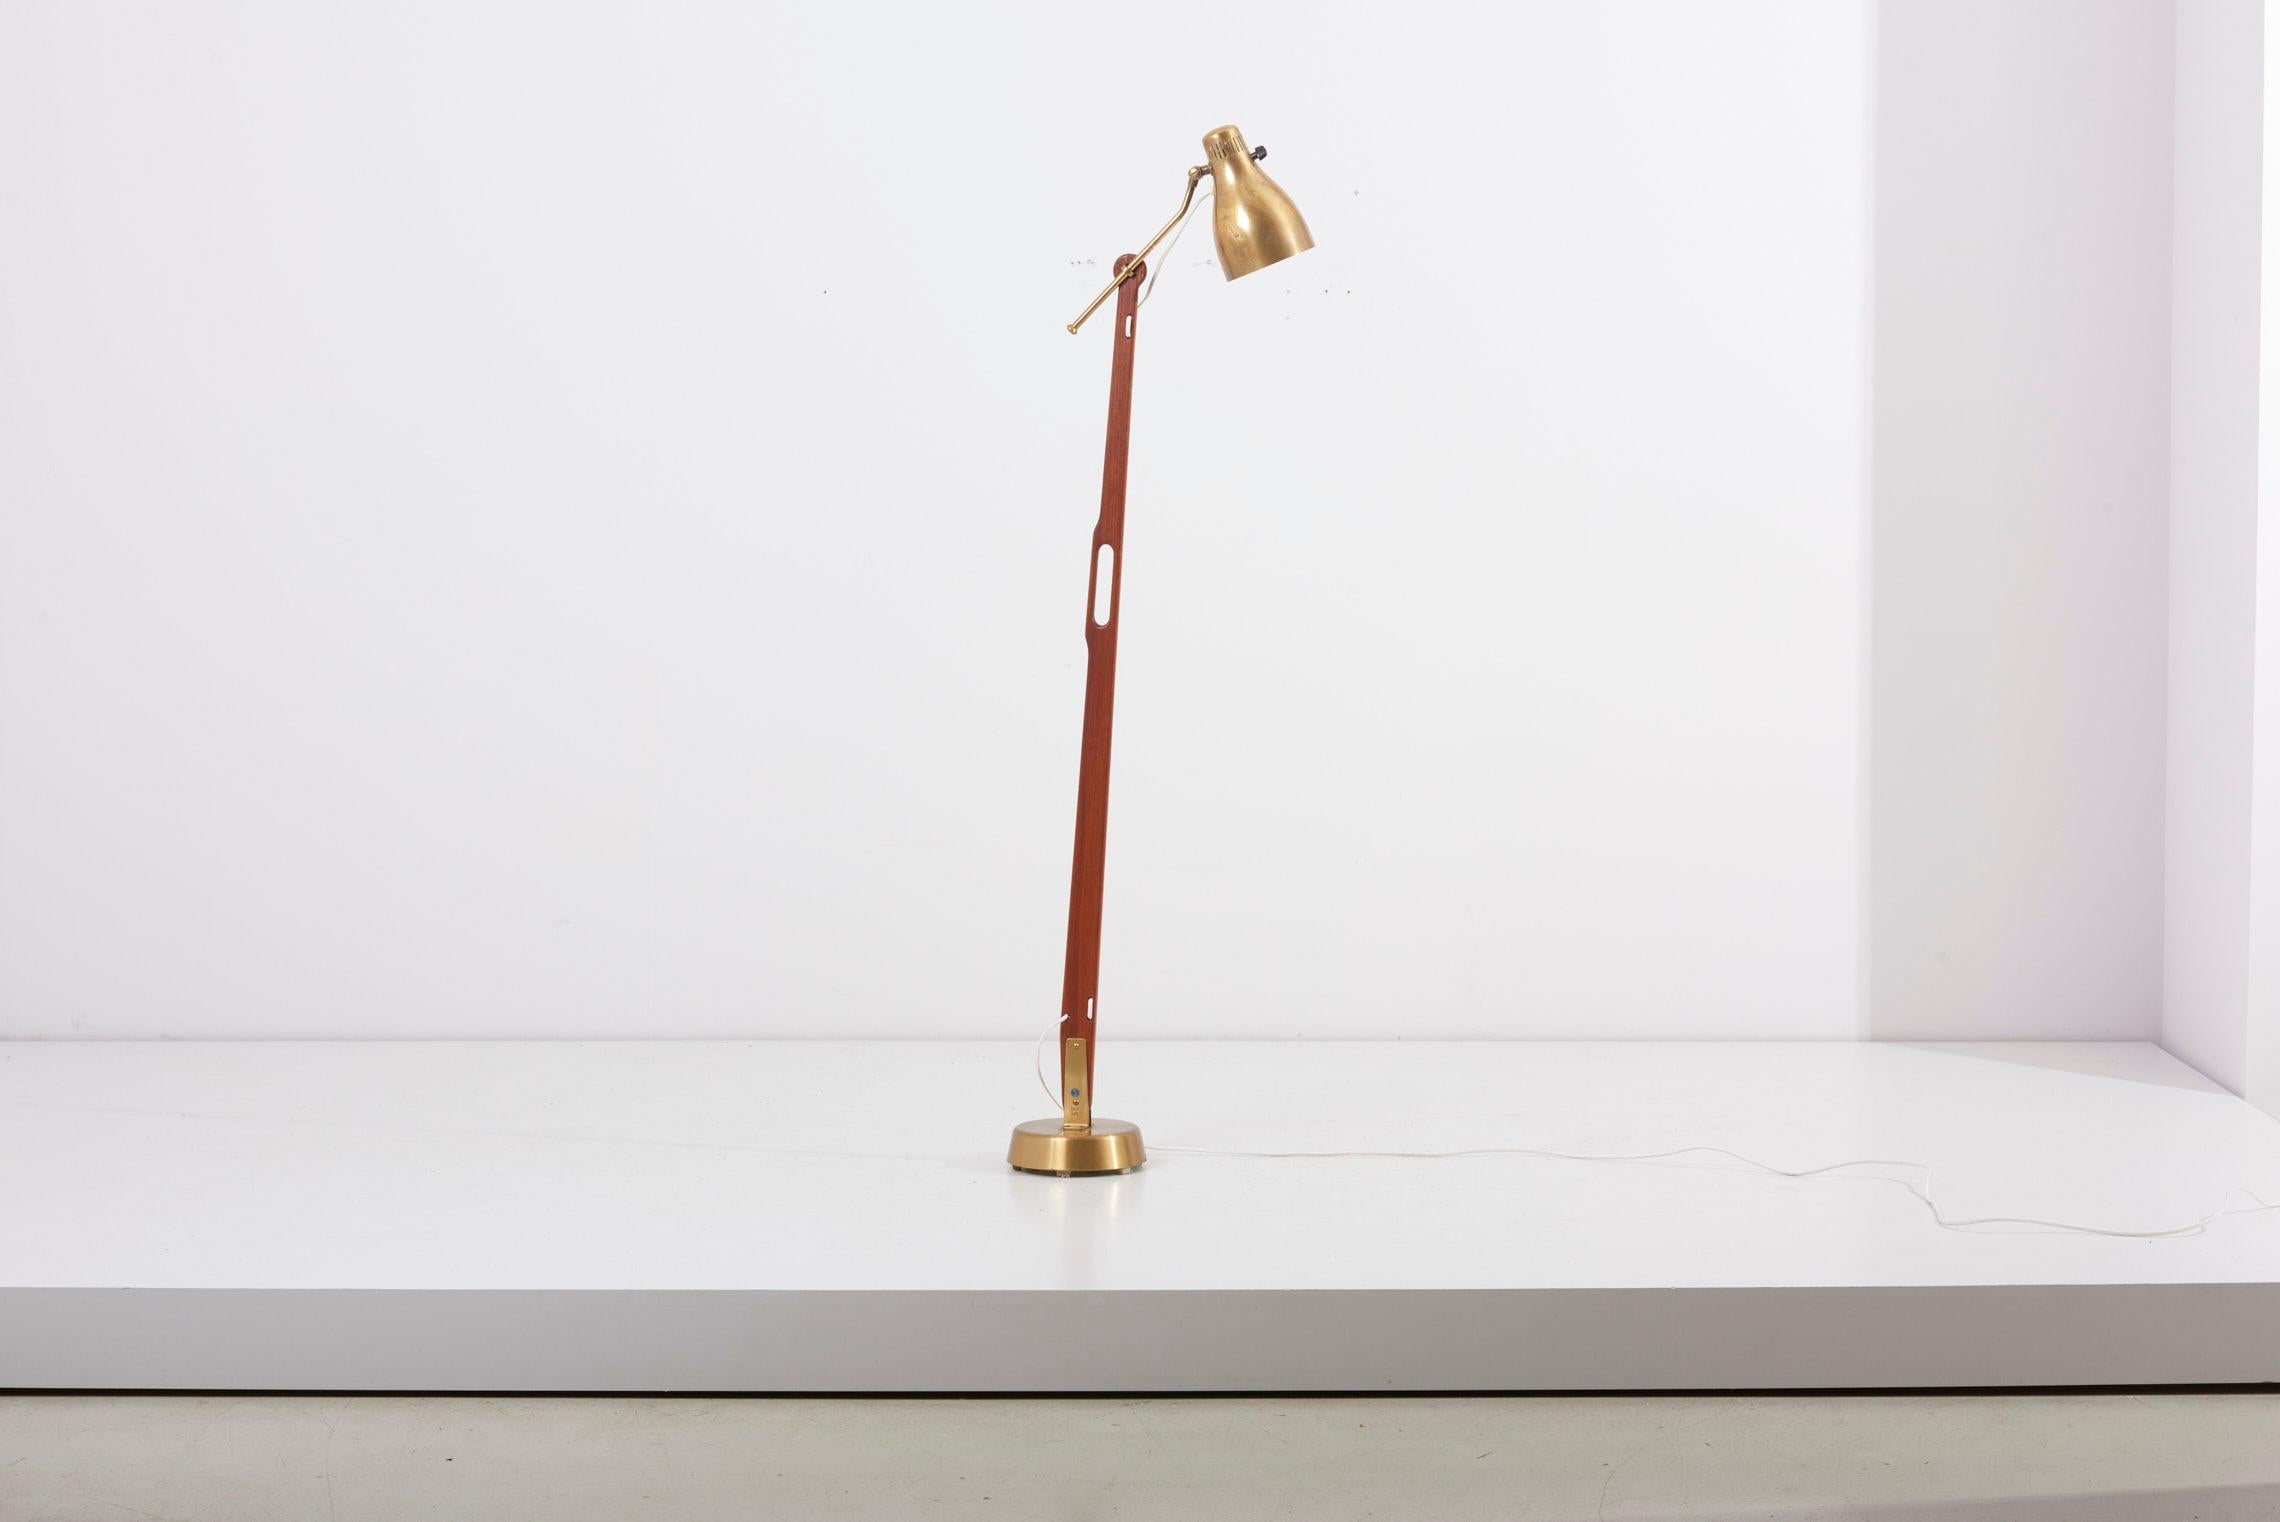 Rare floor lamp, model 544, designed in 1950s by Hans Bergström and manufactured by Ateljé Lyktan in Sweden.
Made of teak wood and brass. Very adjustable and portable due to the handle. Labeled.

1 x E27 socket.

Please note: Lamp should be